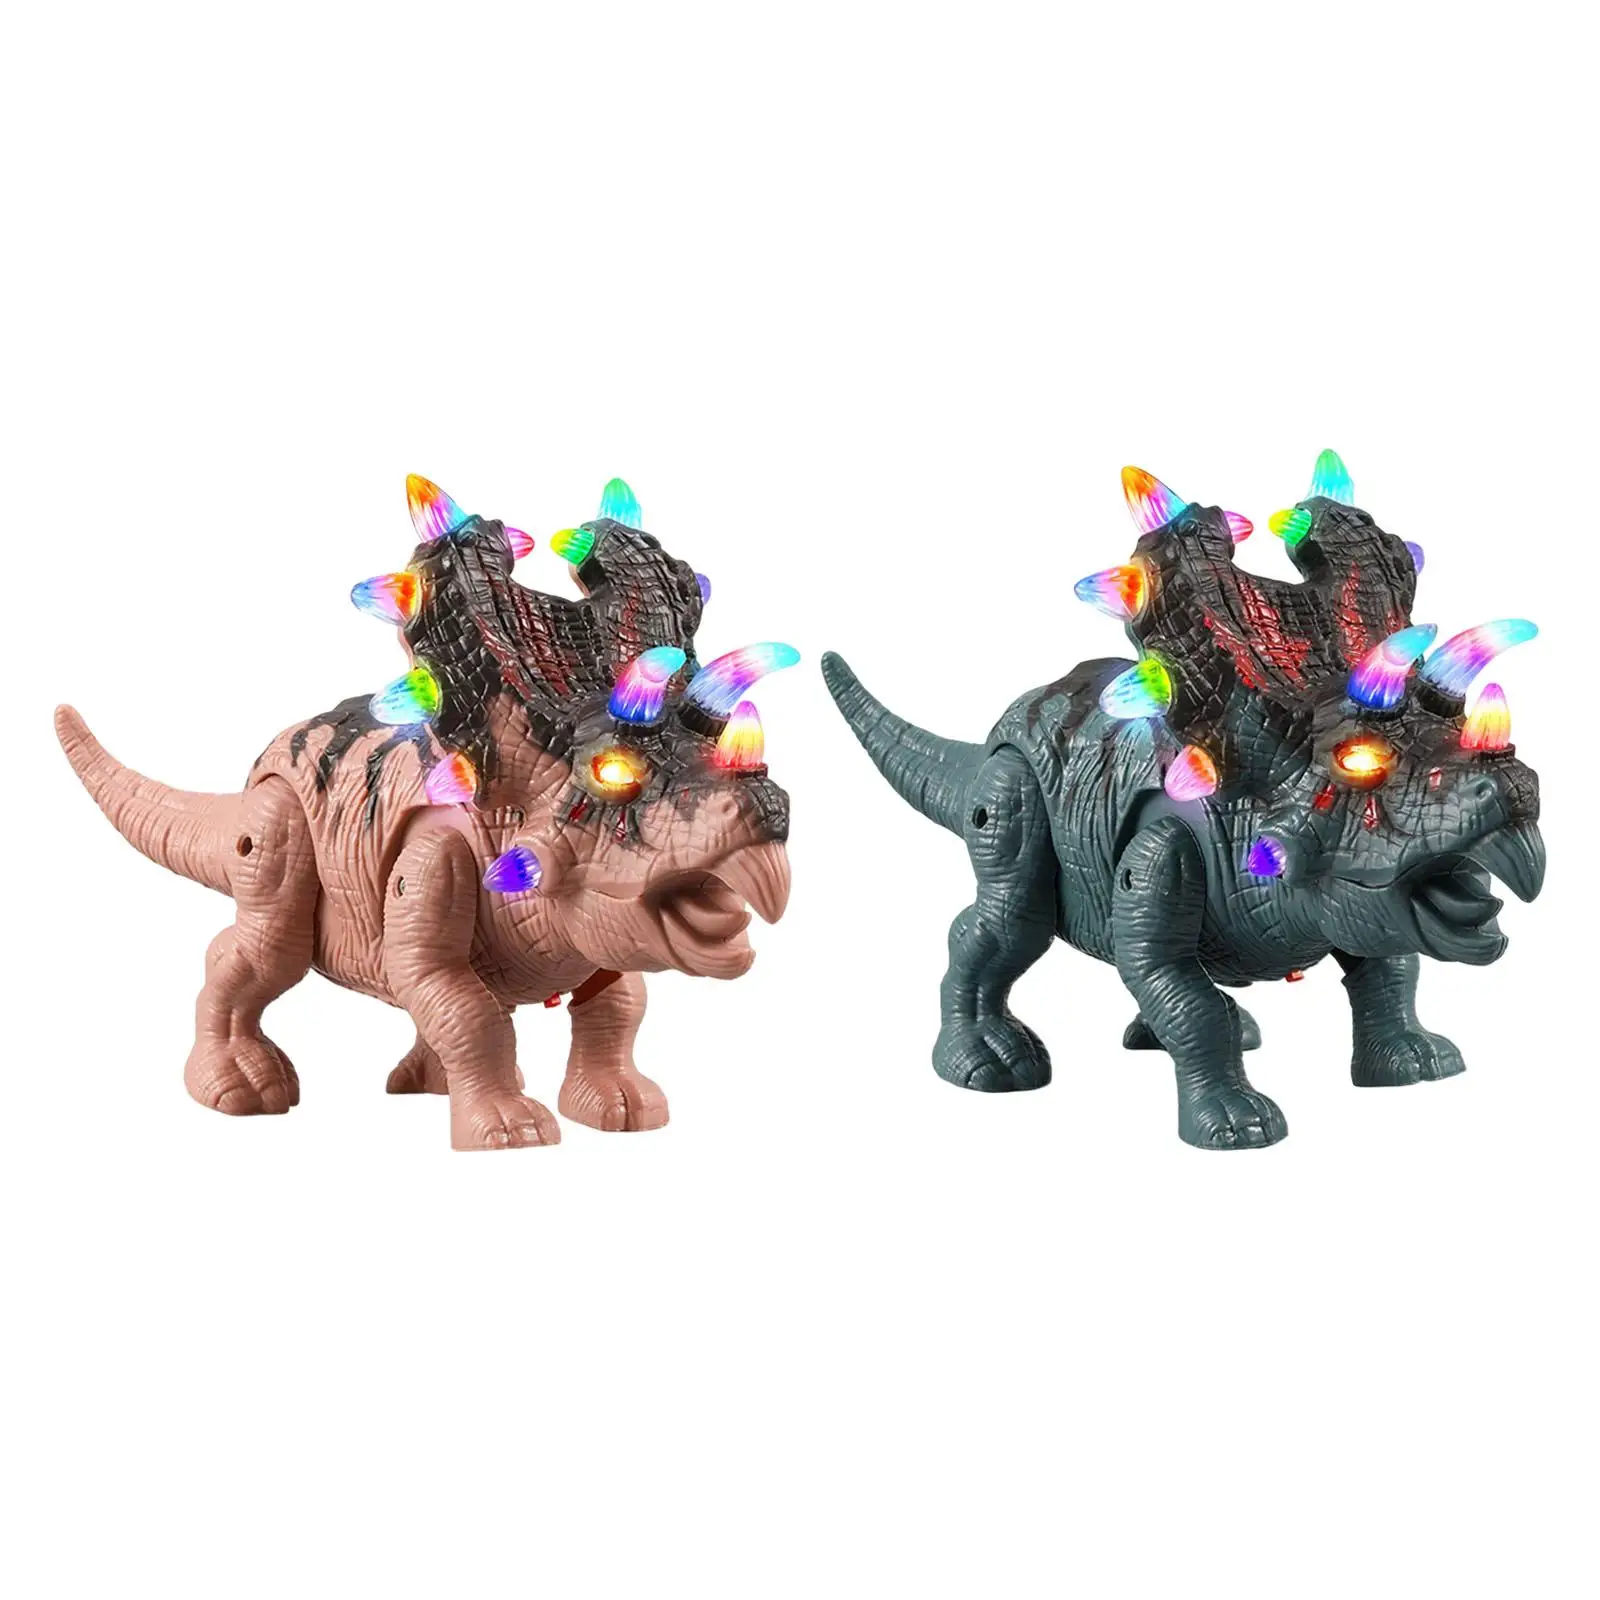 Simulation Walking Robot Dinosaur Figure with Sounds for Girls Boys Kids Holiday Present